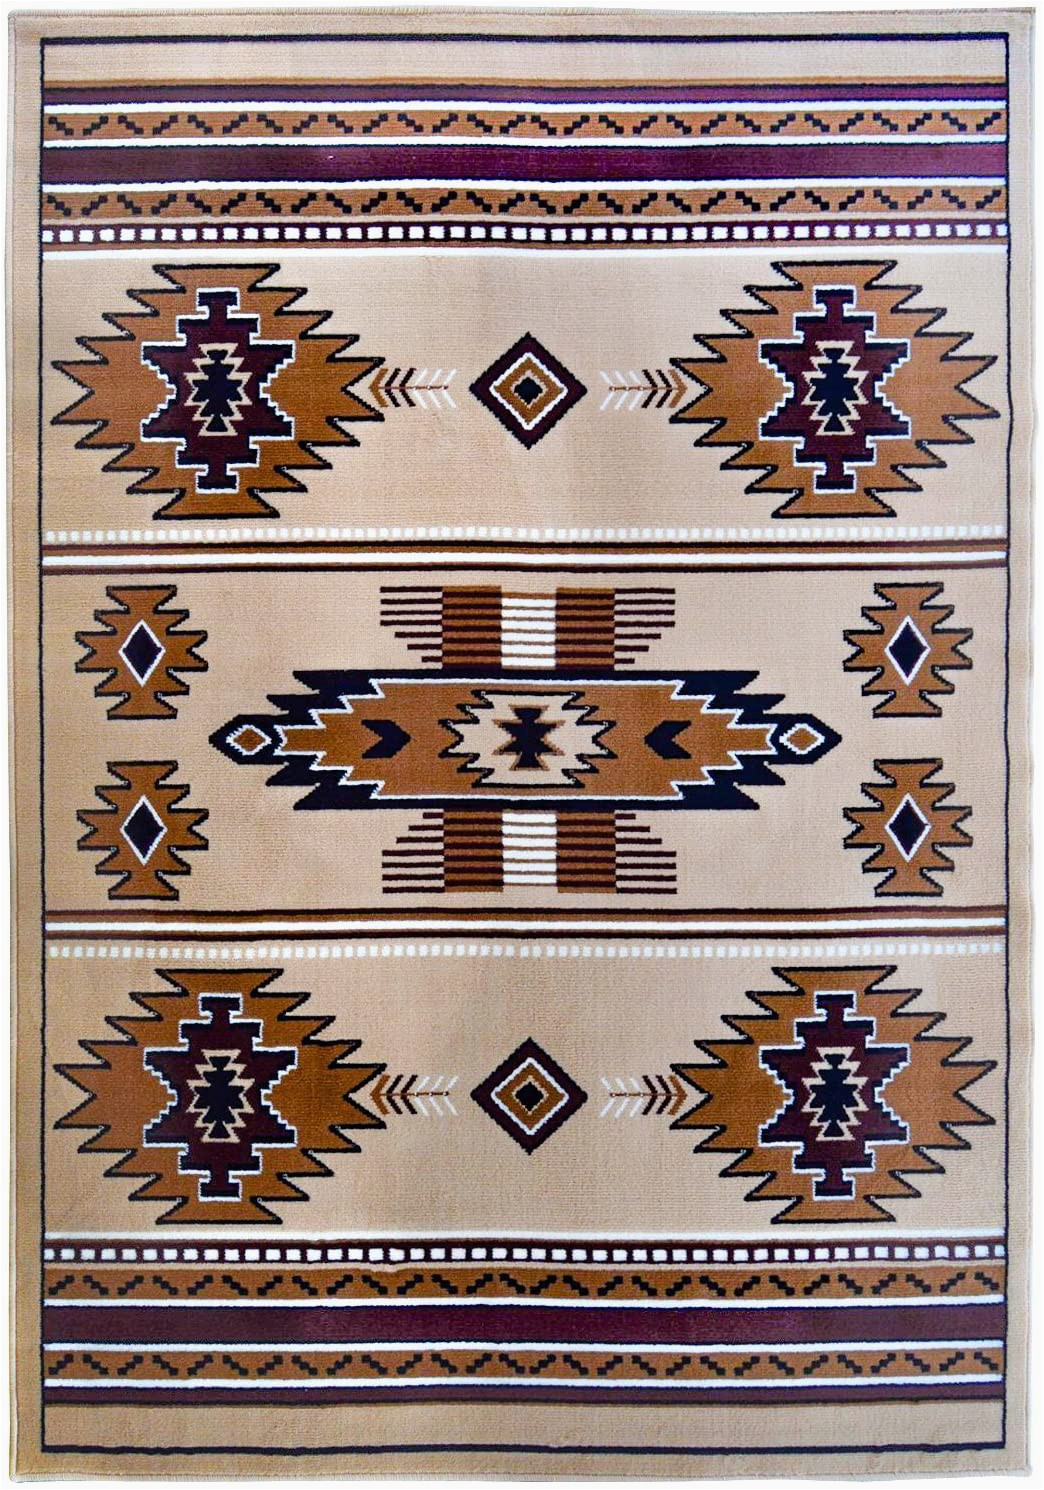 American Indian Style area Rugs Rugs 4 Less Collection southwest Native American Indian area Rug Design In Beige Berber Sw3 5 X7